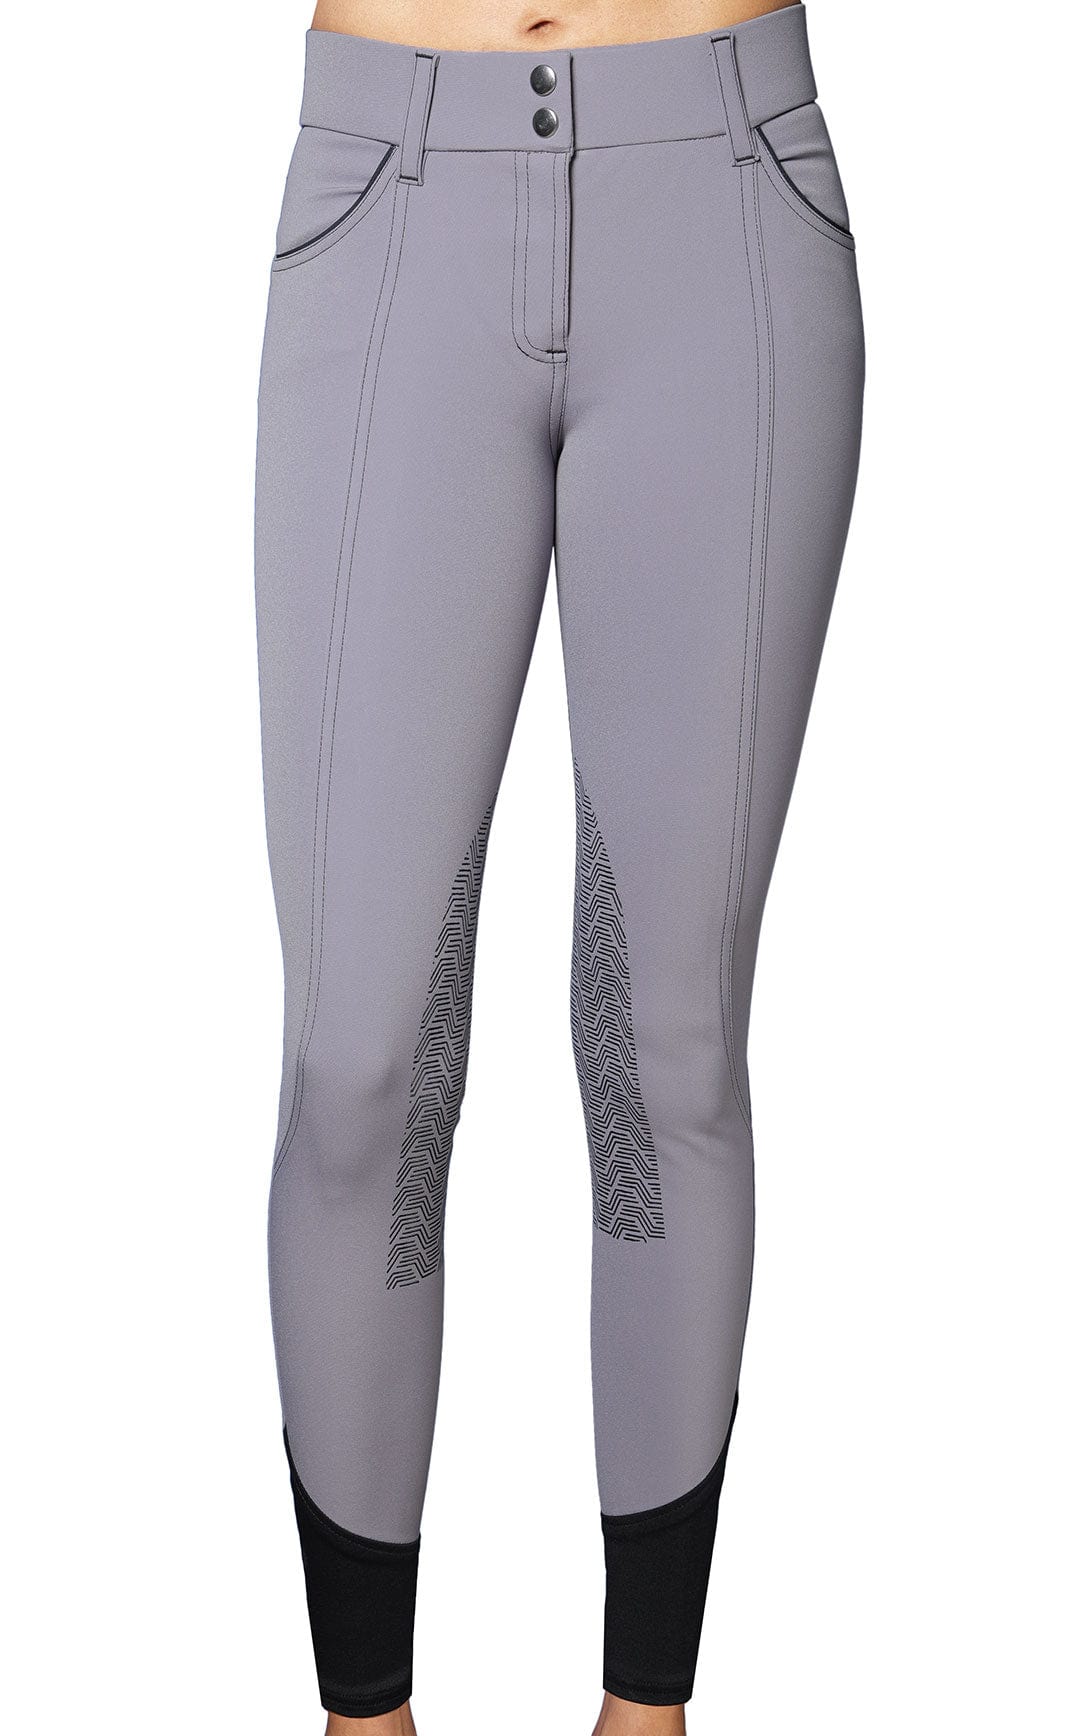 GhoDho Breeches GhoDho- Elara Breeches- Twilight equestrian team apparel online tack store mobile tack store custom farm apparel custom show stable clothing equestrian lifestyle horse show clothing riding clothes horses equestrian tack store